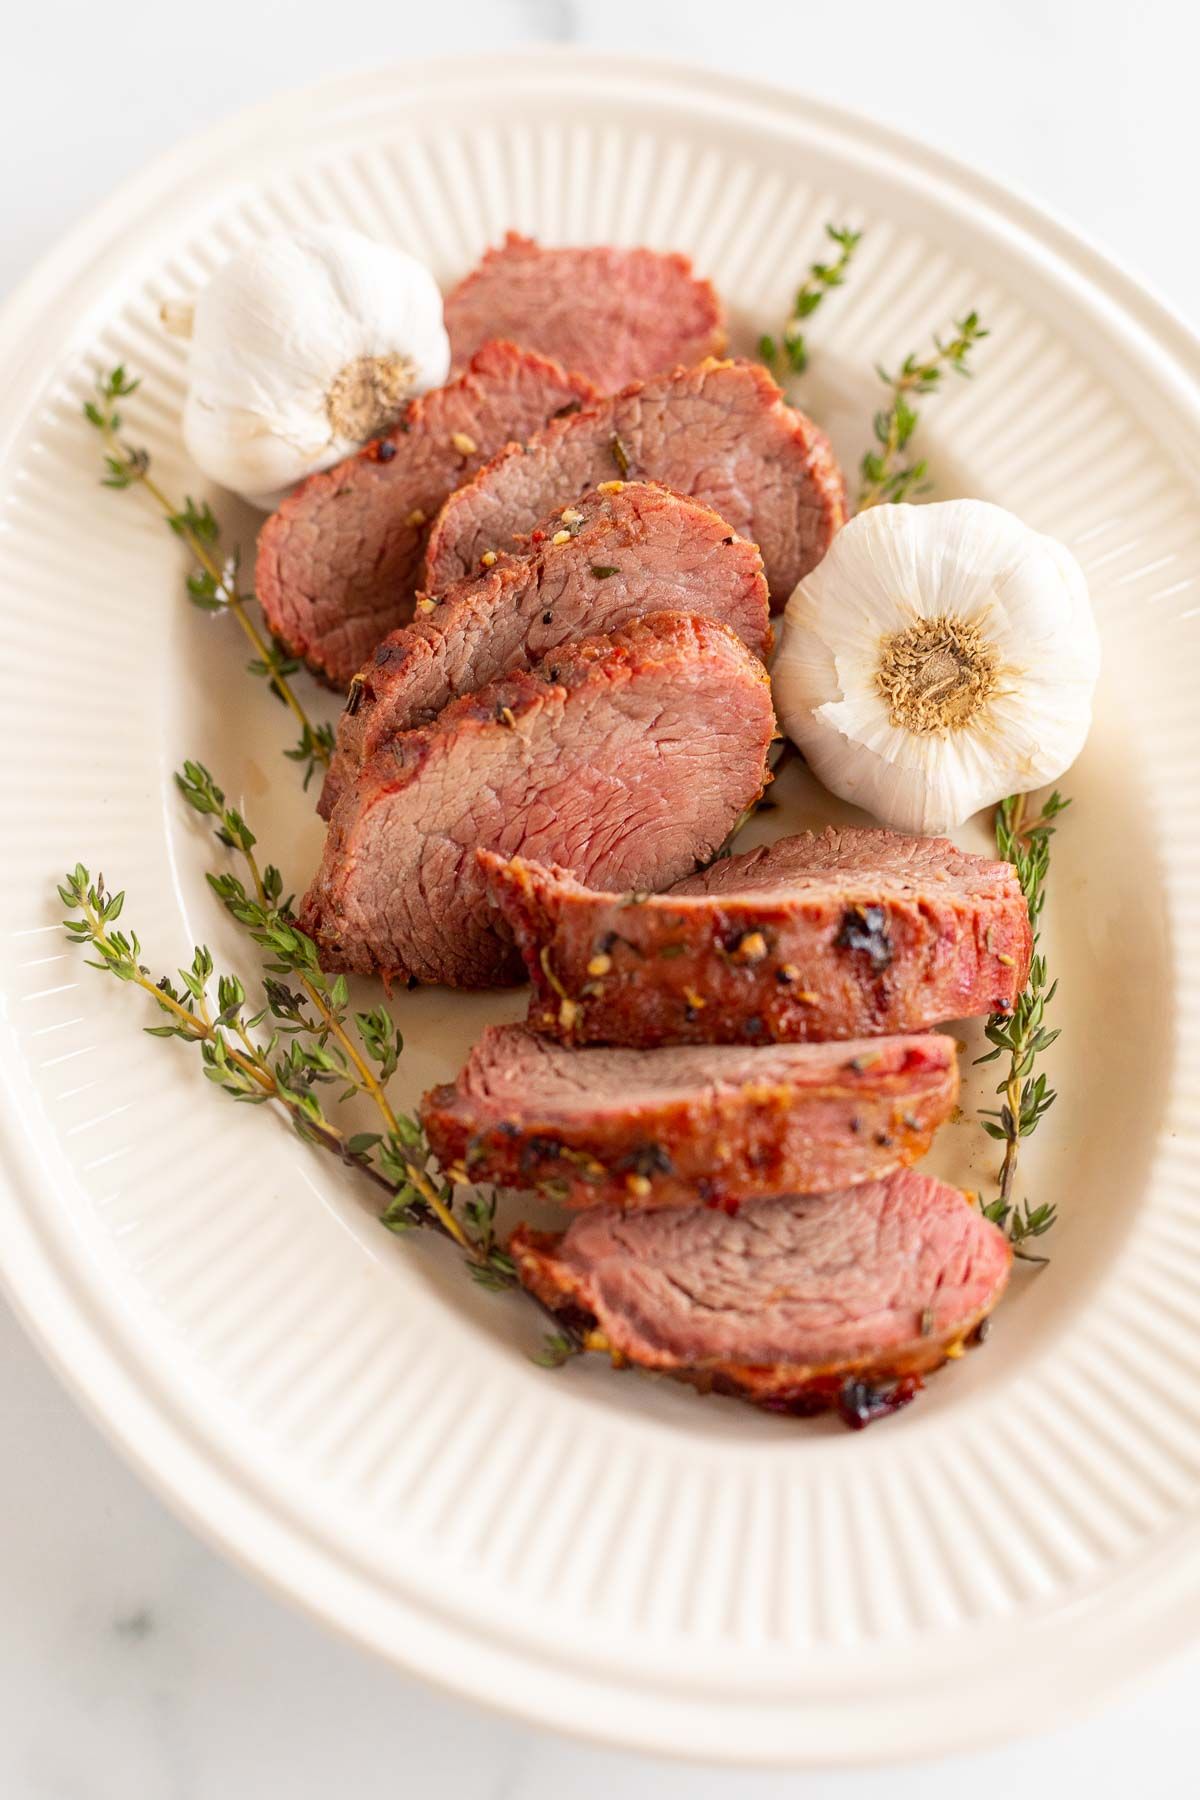 A platter of sliced beef tenderloin, garnished with fresh thyme and garlic.